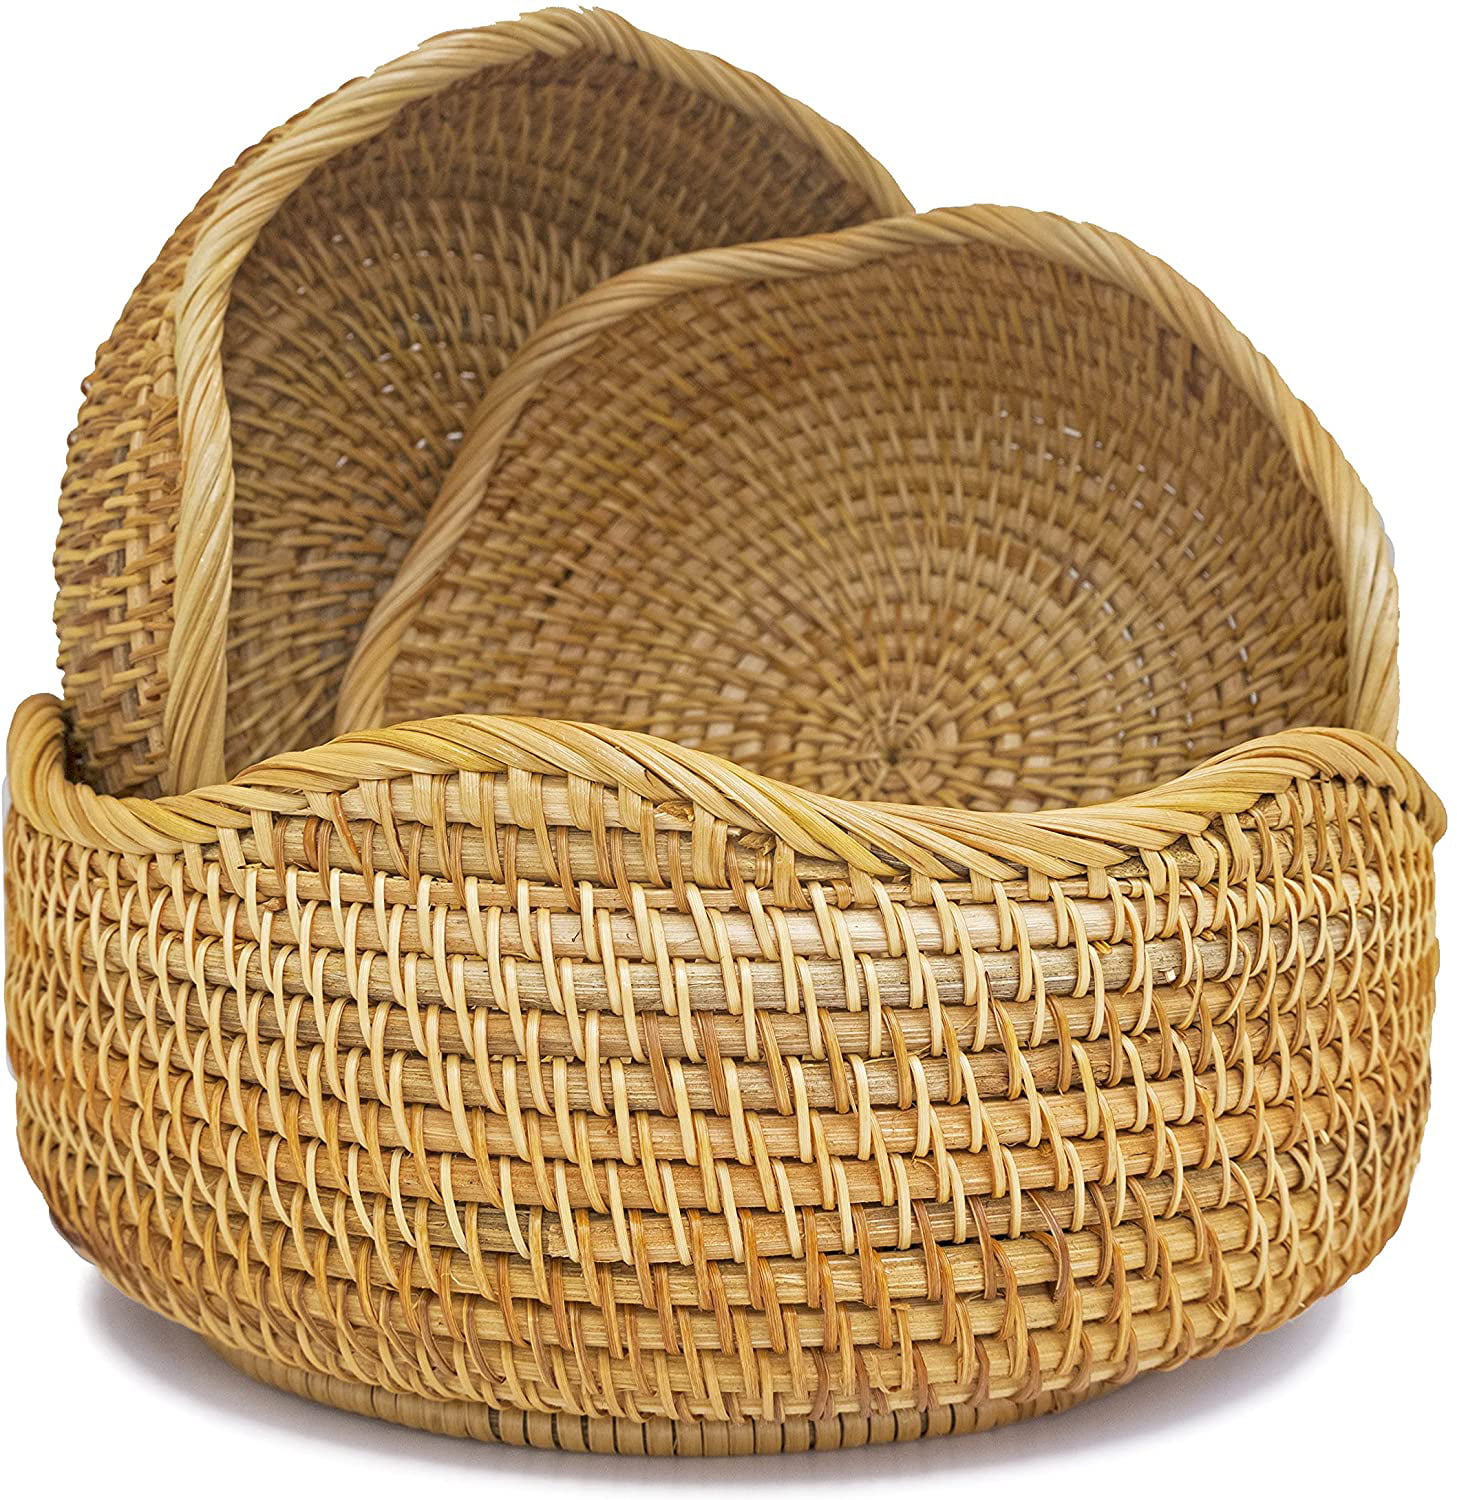 Round Bread Baskets for Kitchen Counter Rattan Fruit And Vegetable Storage Trays Set 2 Woven Serving Potatoes Onions Key Basket Holder Organizing Bathroom Toys Craft Wall Decor Art Woman Honey Brown 